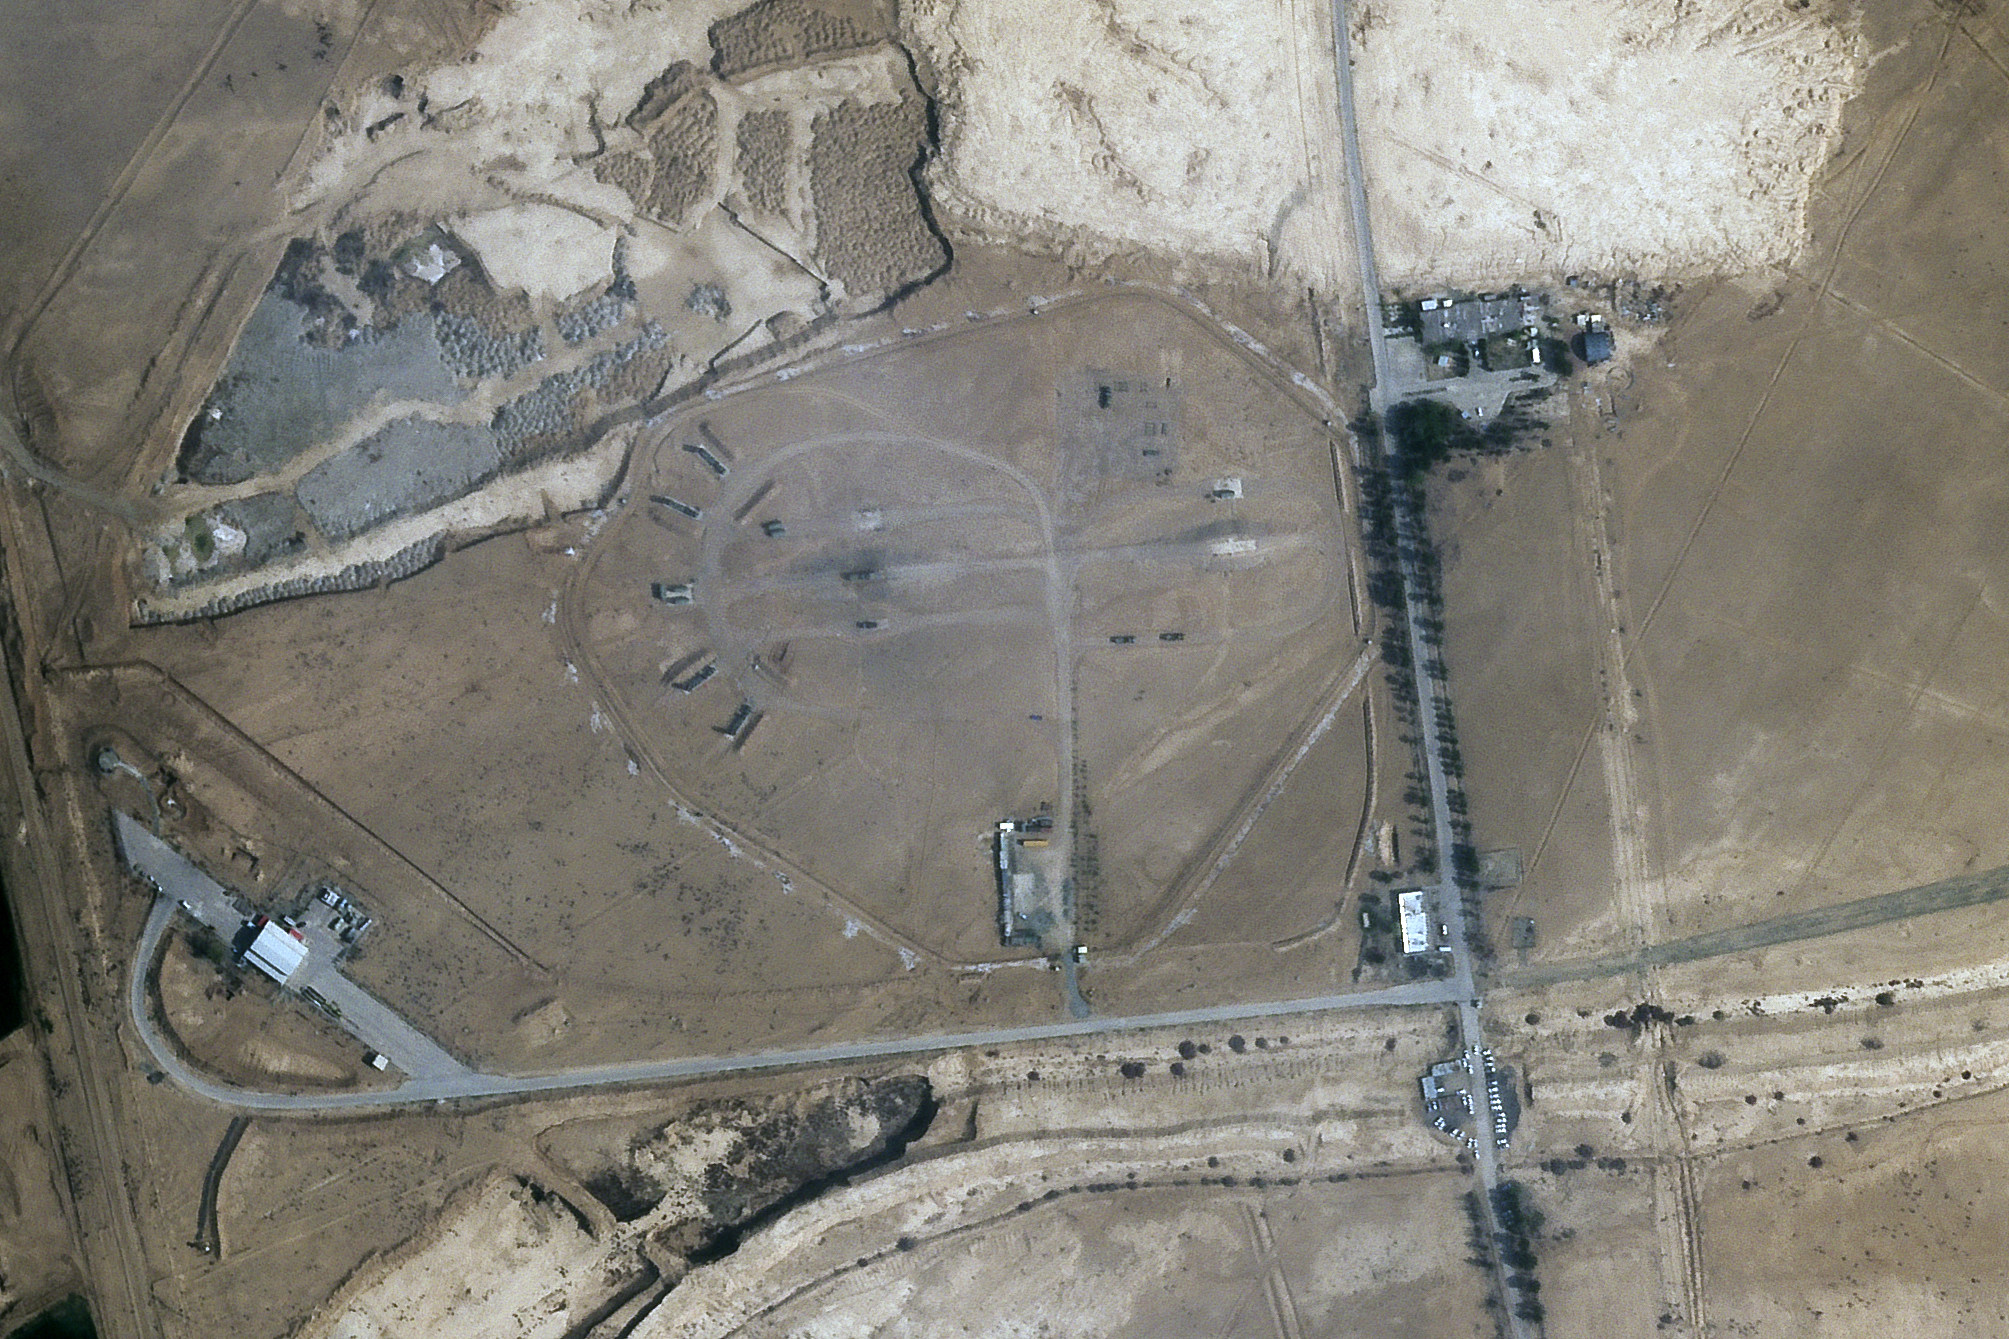 A missile defence site near an international airport and air base in Isfahan, Iran. Photo: Planet Labs PBC via AP